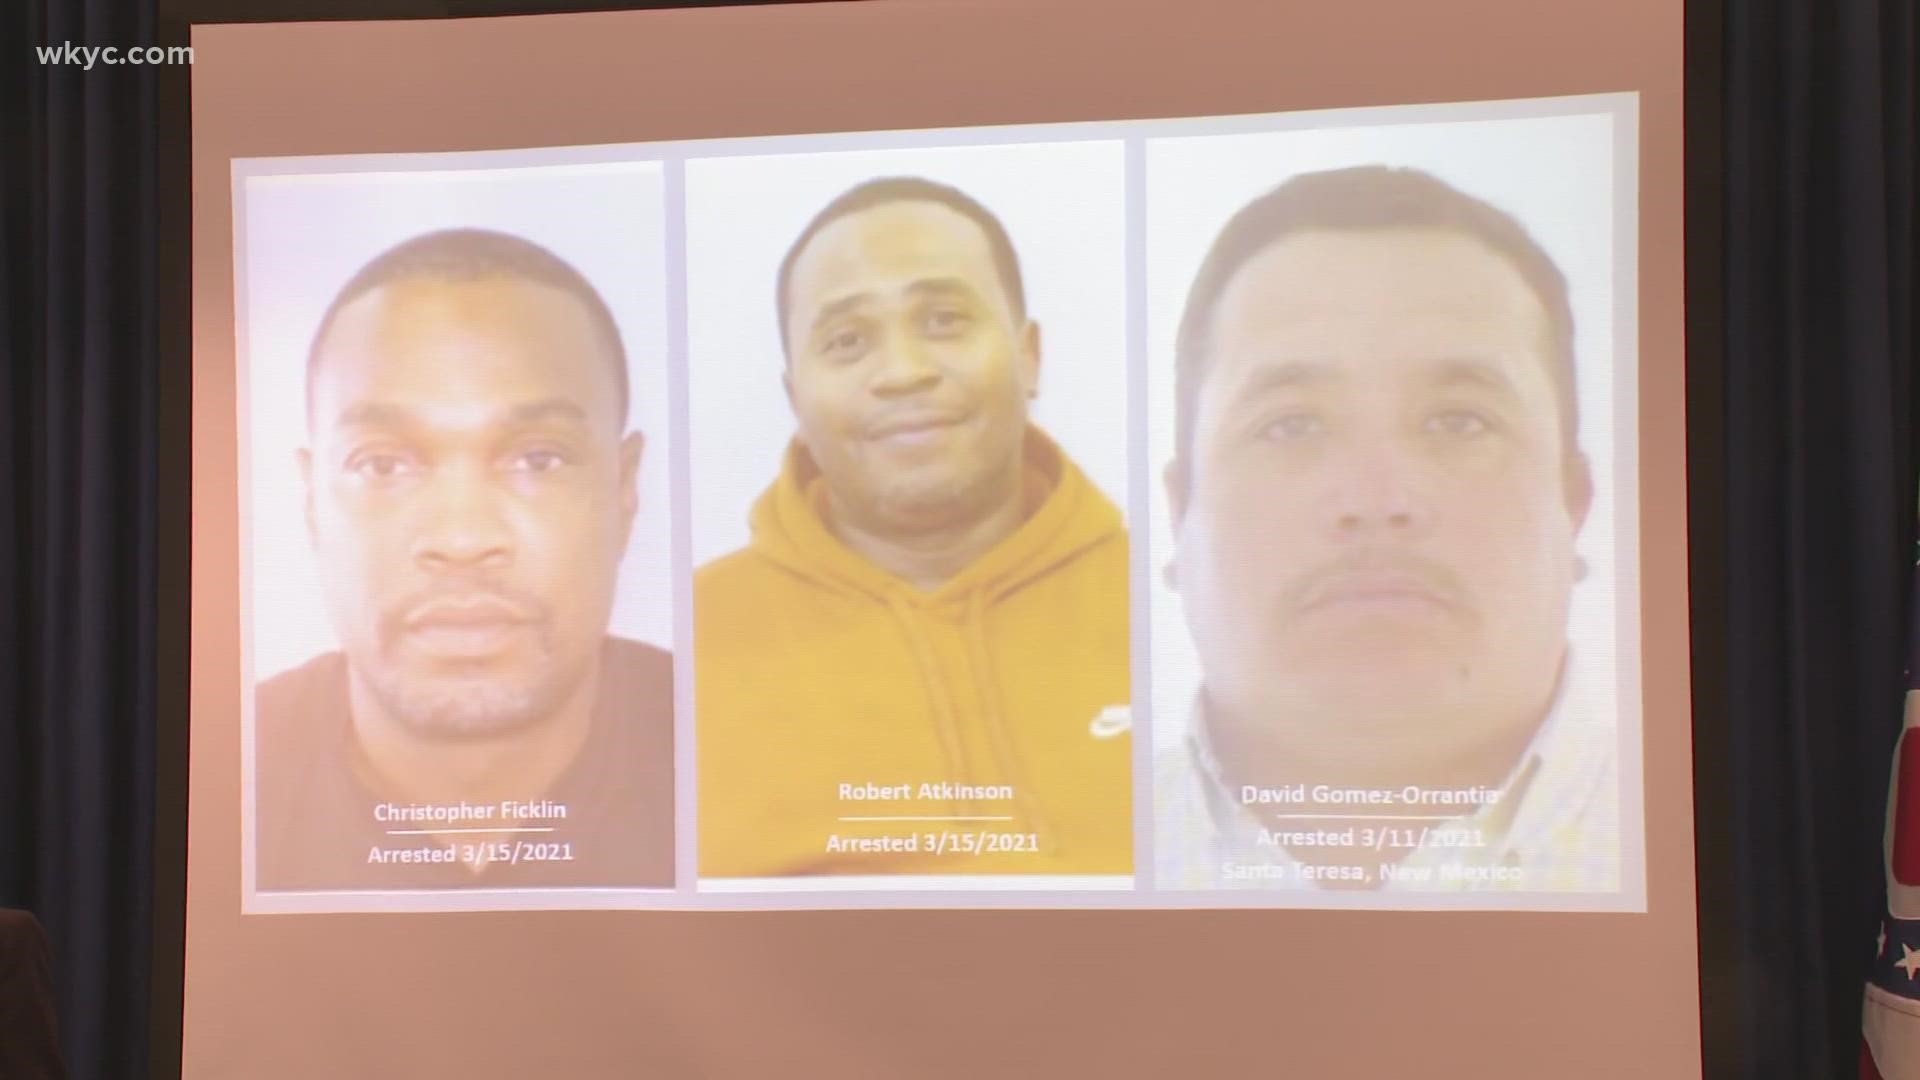 The U.S. Attorney’s Office for the Northern District of Ohio and Drug Enforcement Administration announced the arrests Tuesday afternoon.